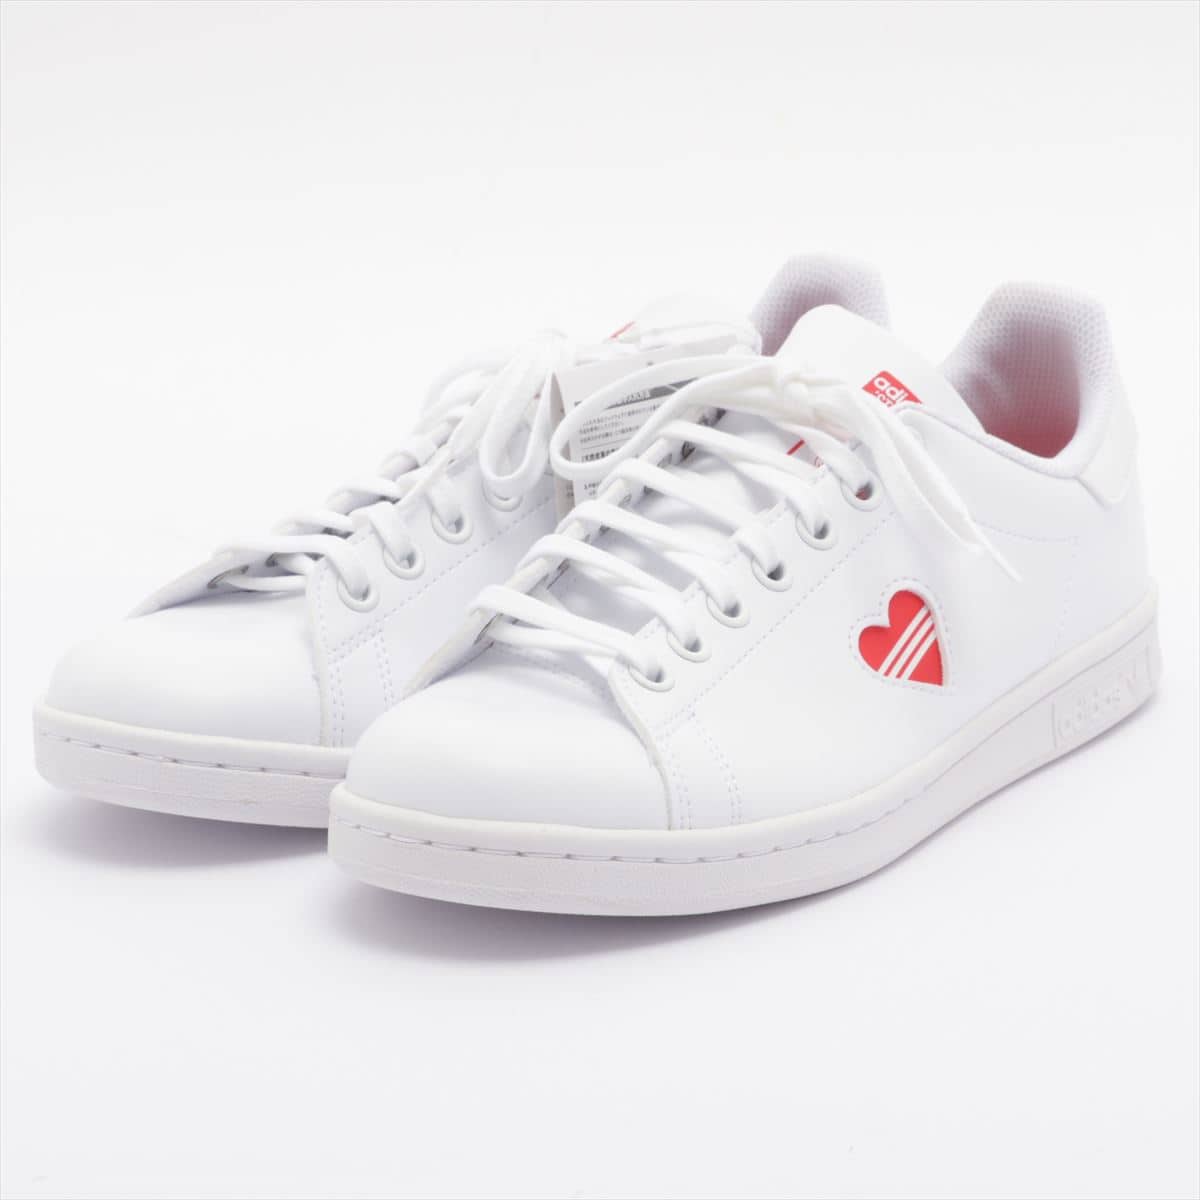 Adidas Faux leather Sneakers JPN24.5 Ladies' Red x white FY4481 Stan Smith Insoles outside